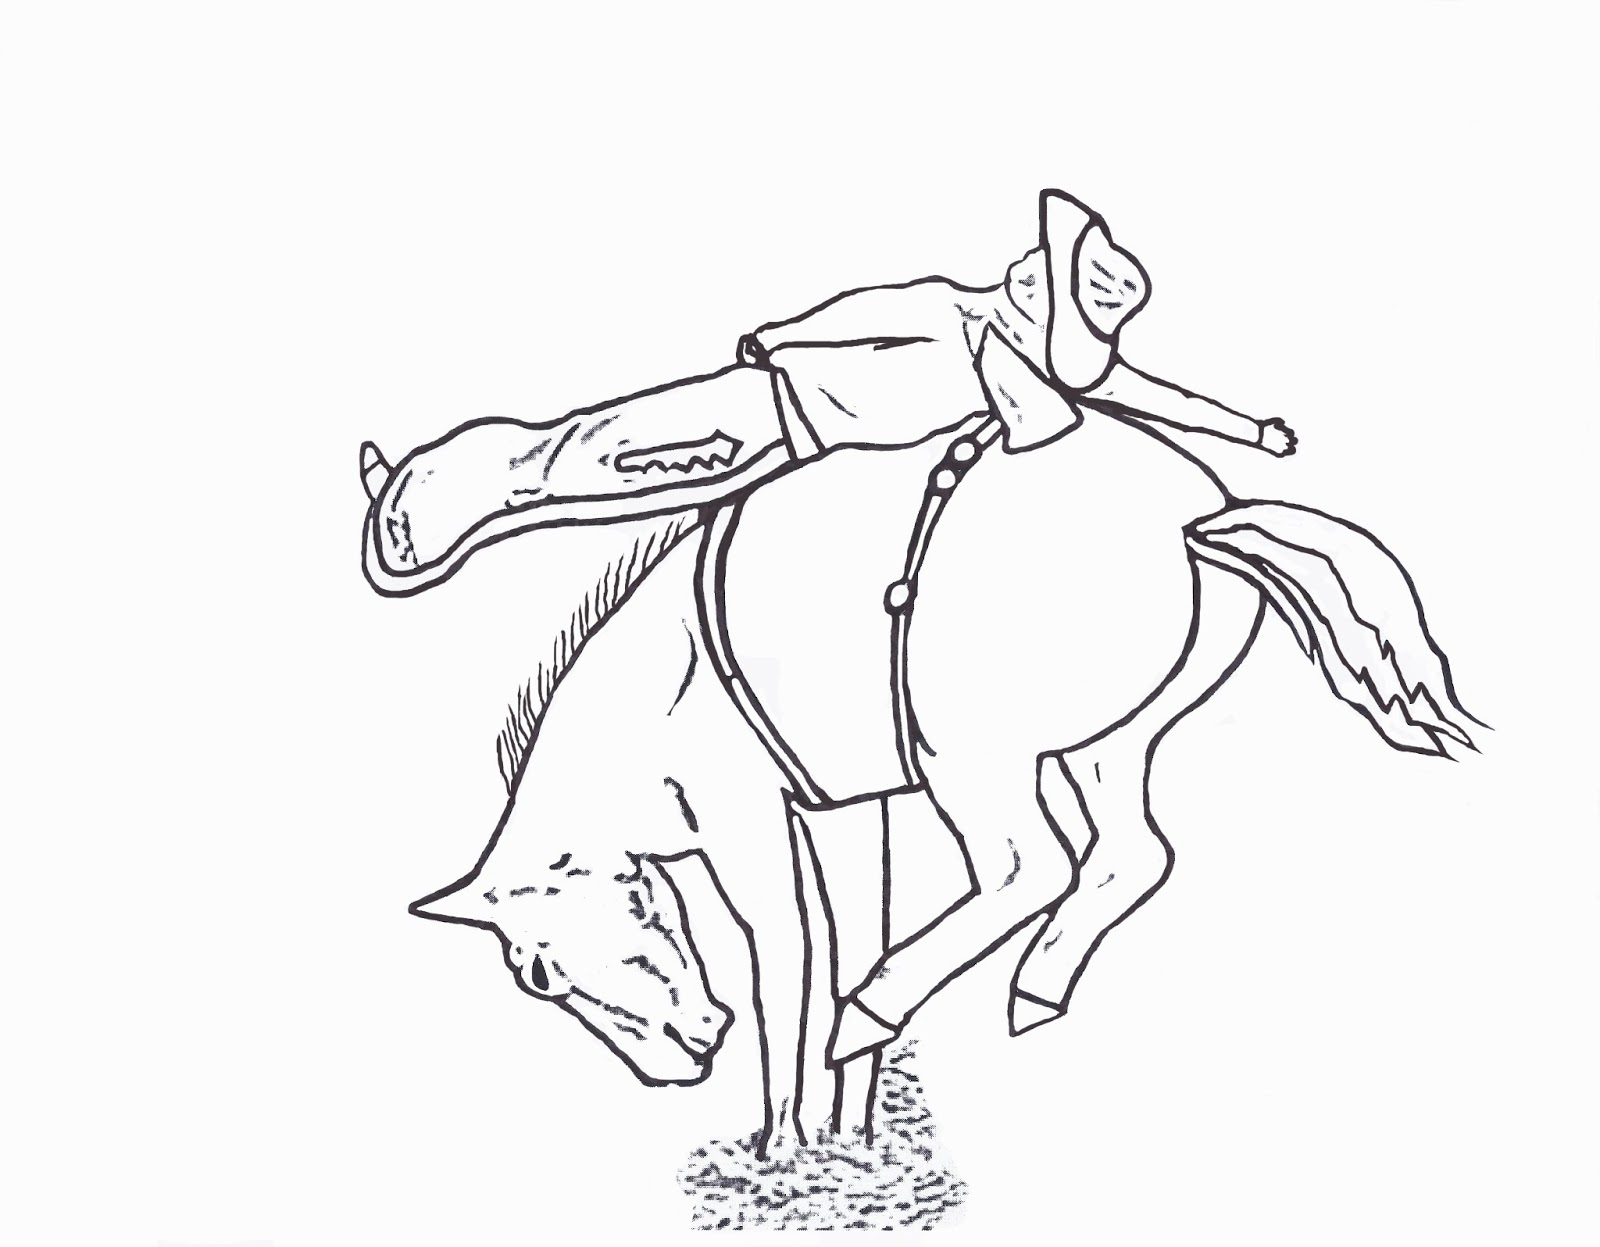 Download RODEO COLORING PAGES: July 2013